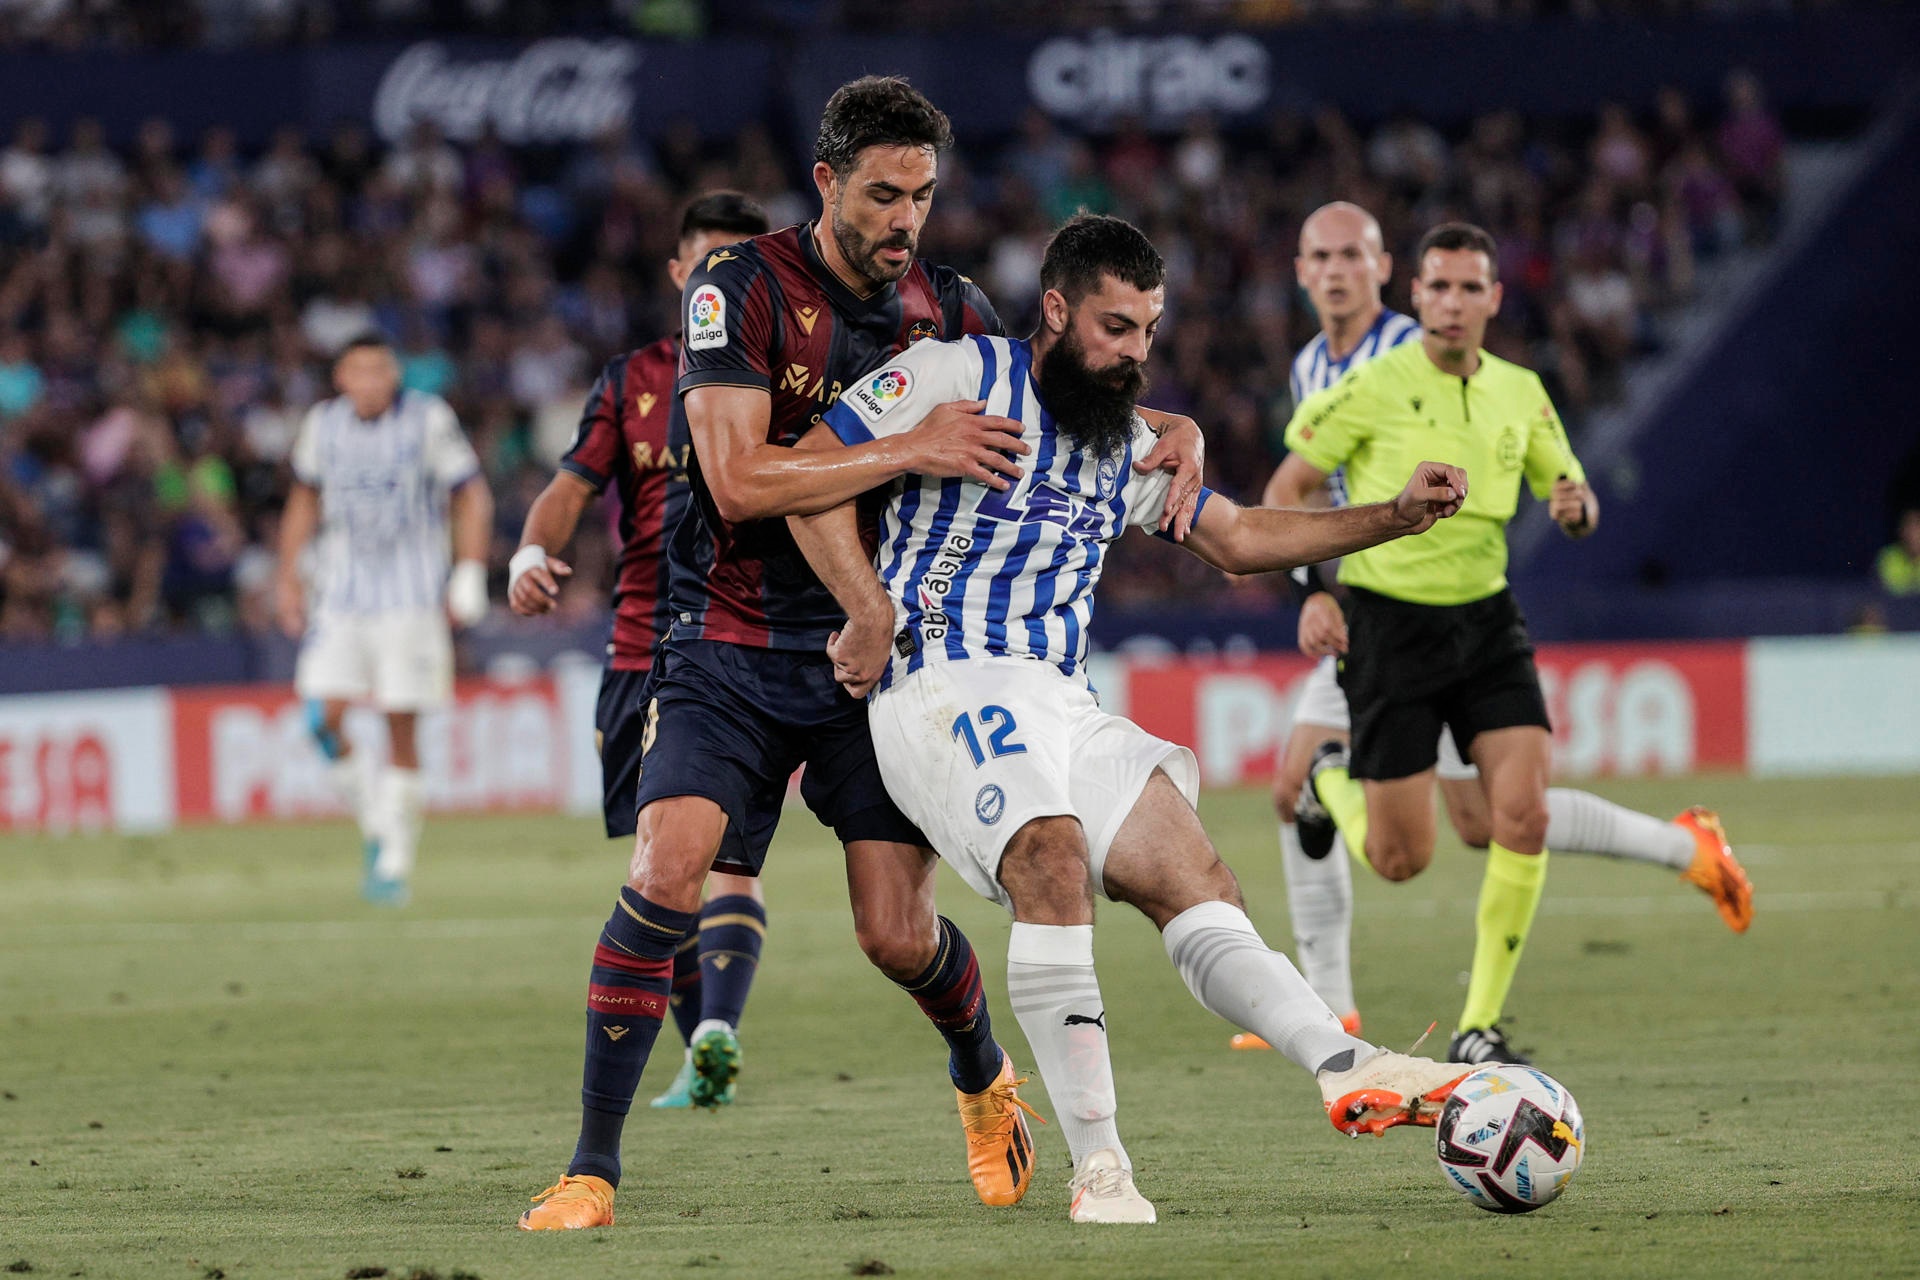 Calero joins Levante in their ambition to sign Iborra and Morales